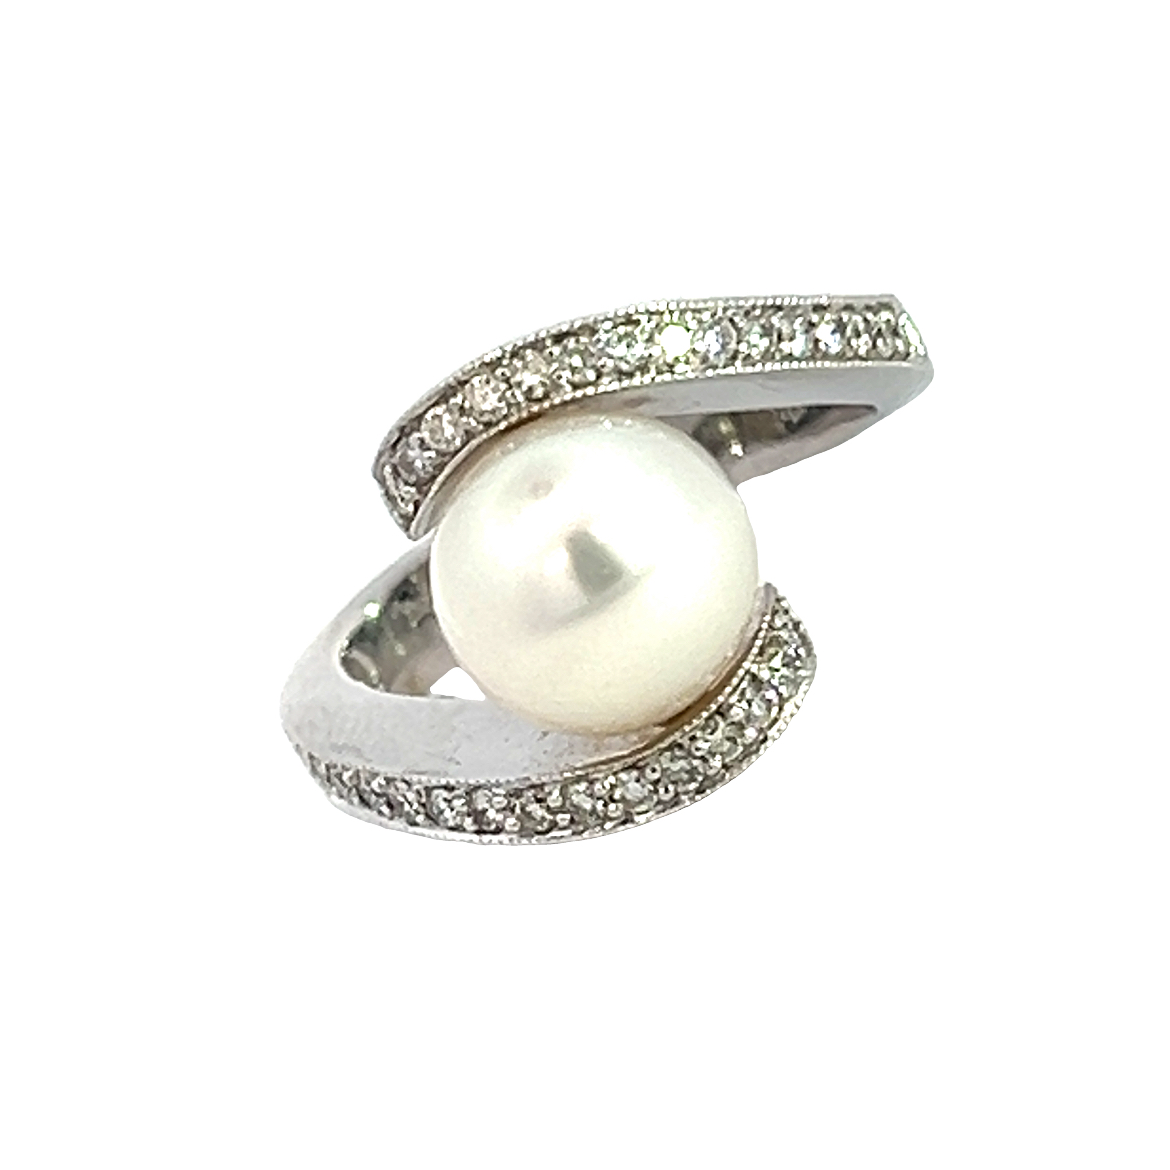 Stunning Pearl and Diamond Ring